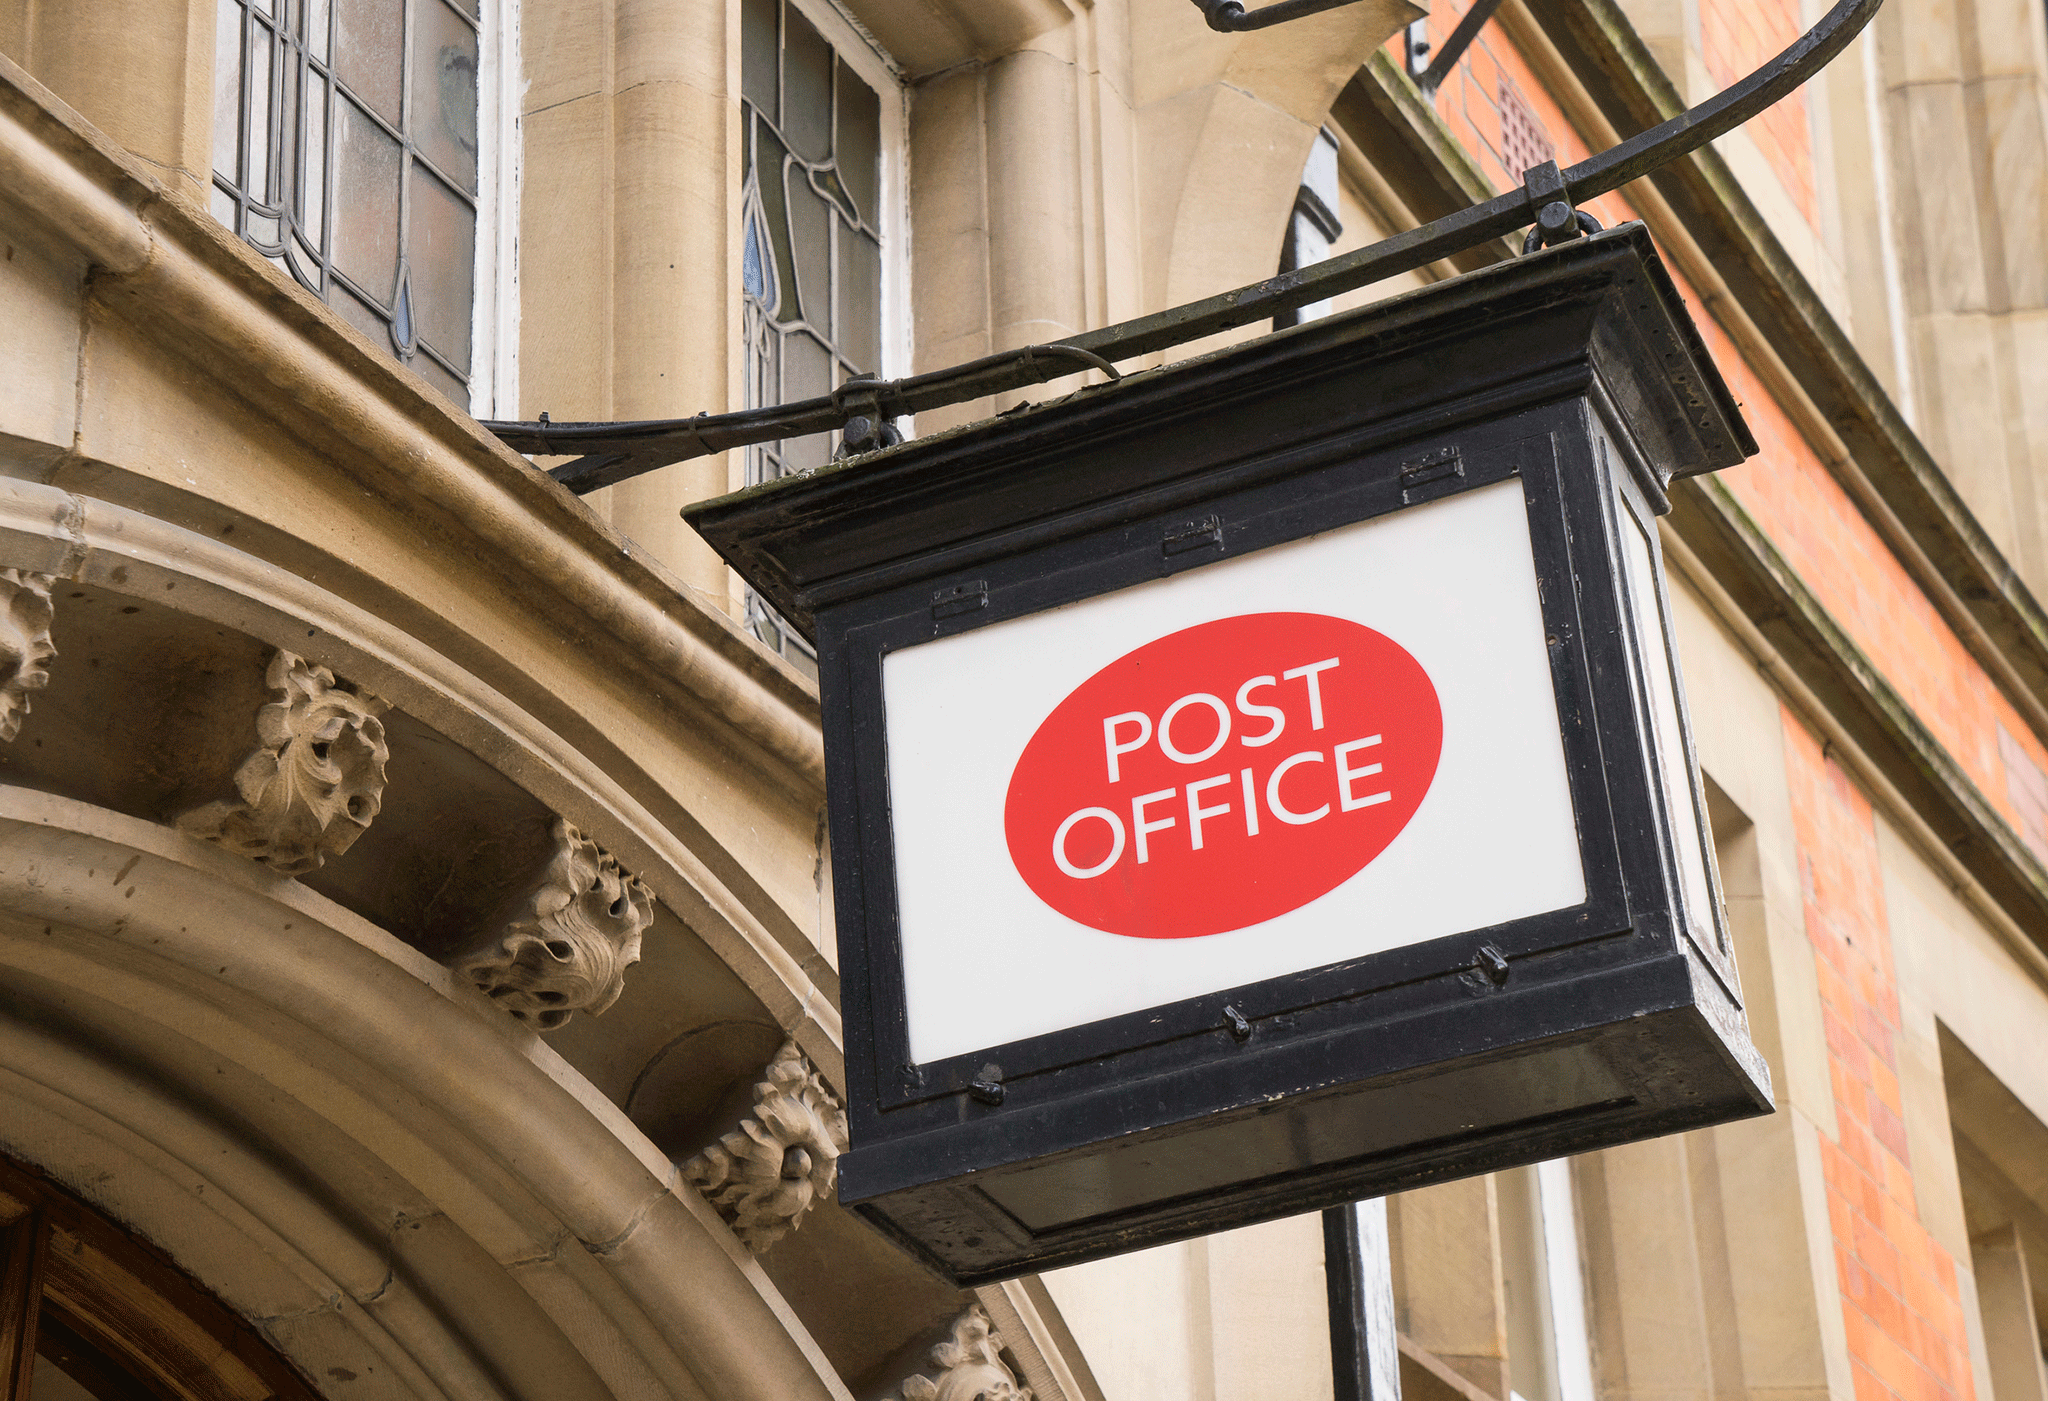 The main Postal workers' union has said action is necessary after a sustained programme of cuts